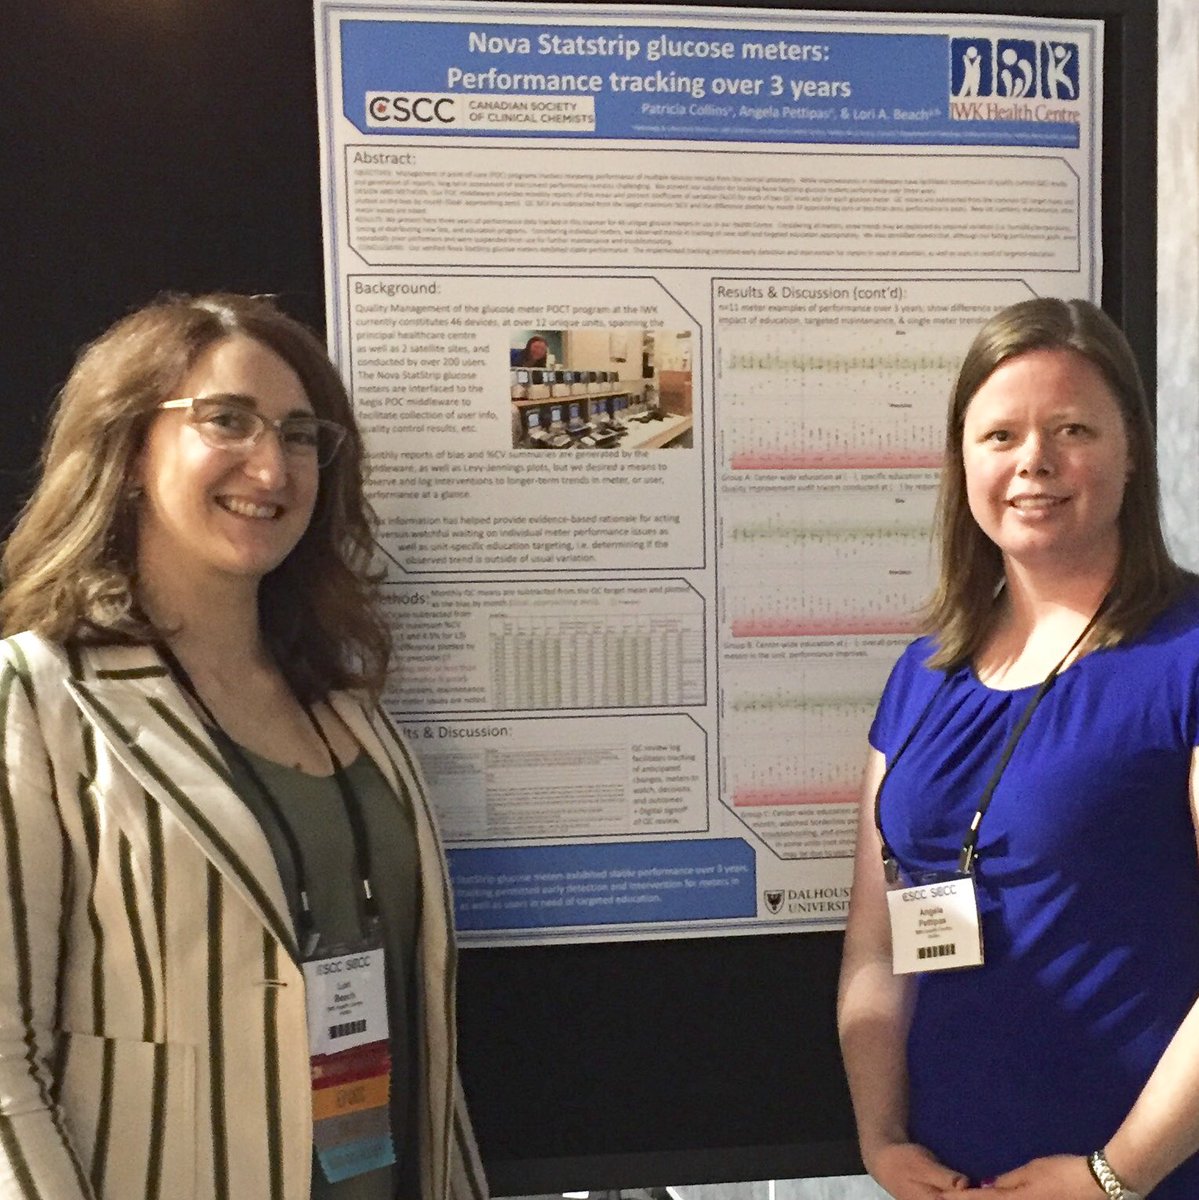 Thanks @IWKHealthCentre for a great opportunity to bring our hardworking #MLTs who did the hands-on work for these posters to #cscc2019 #wearelab #labmedicine #obsessedwithquality